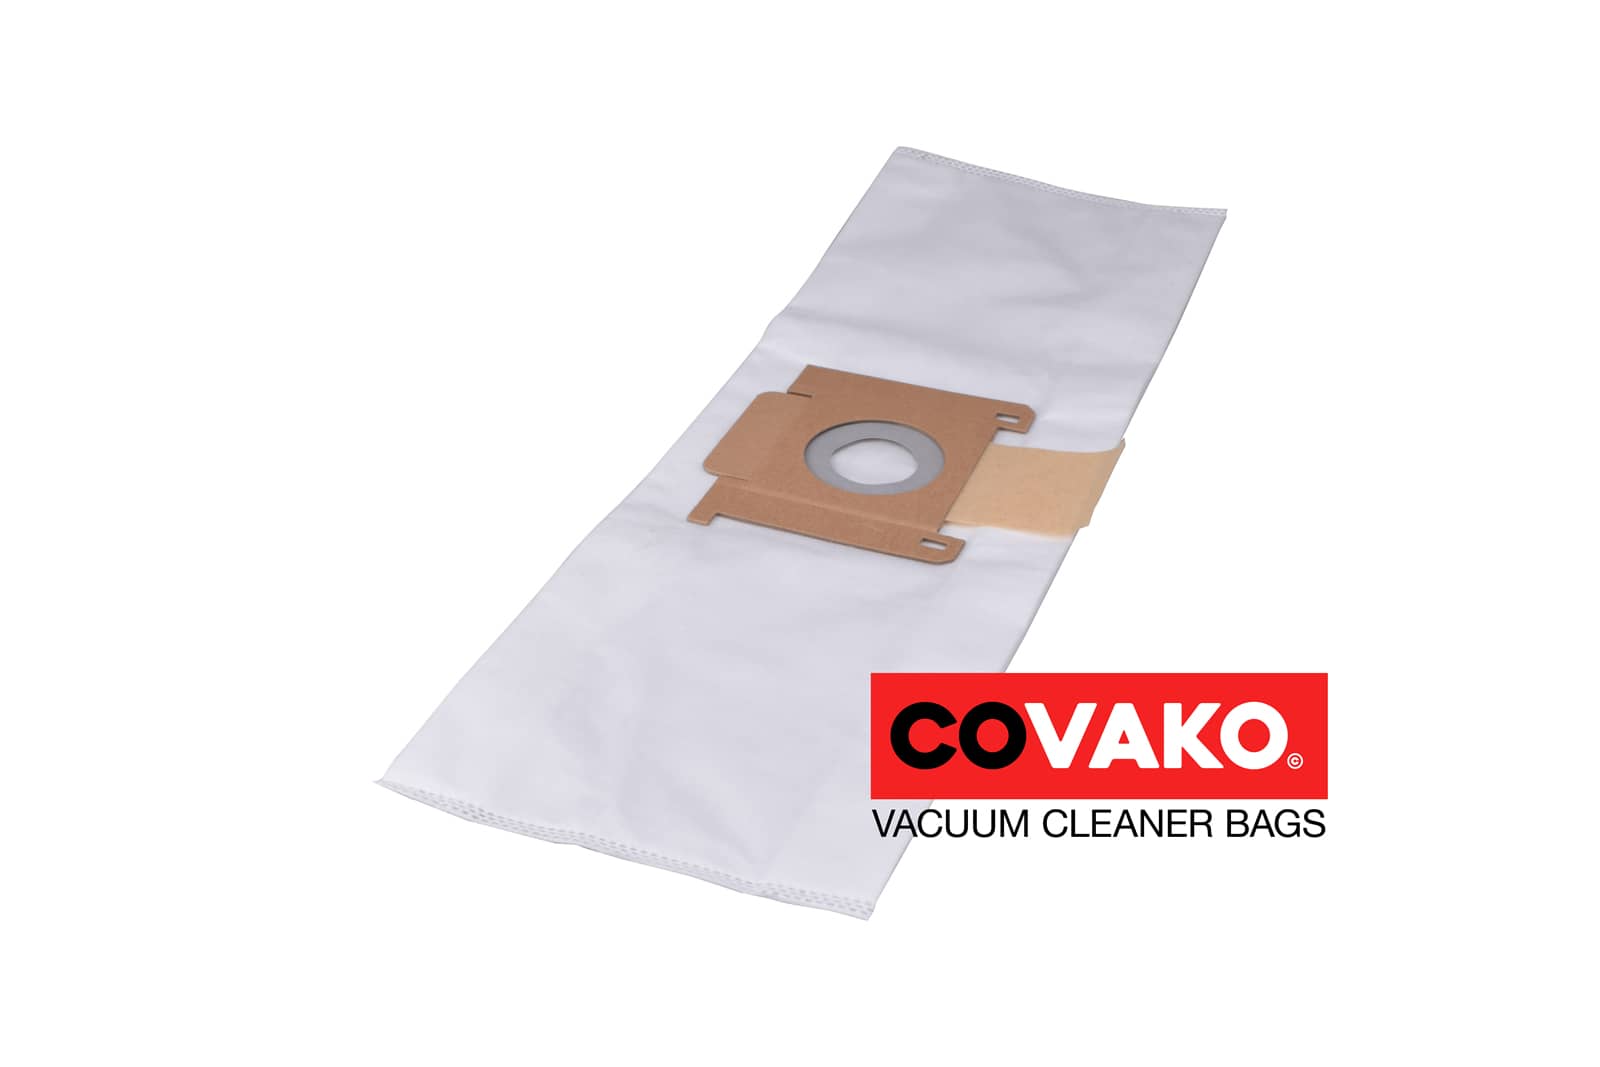 Clean a la Card Steady Extra 6.0 / Synthesis - Clean a la Card vacuum cleaner bags